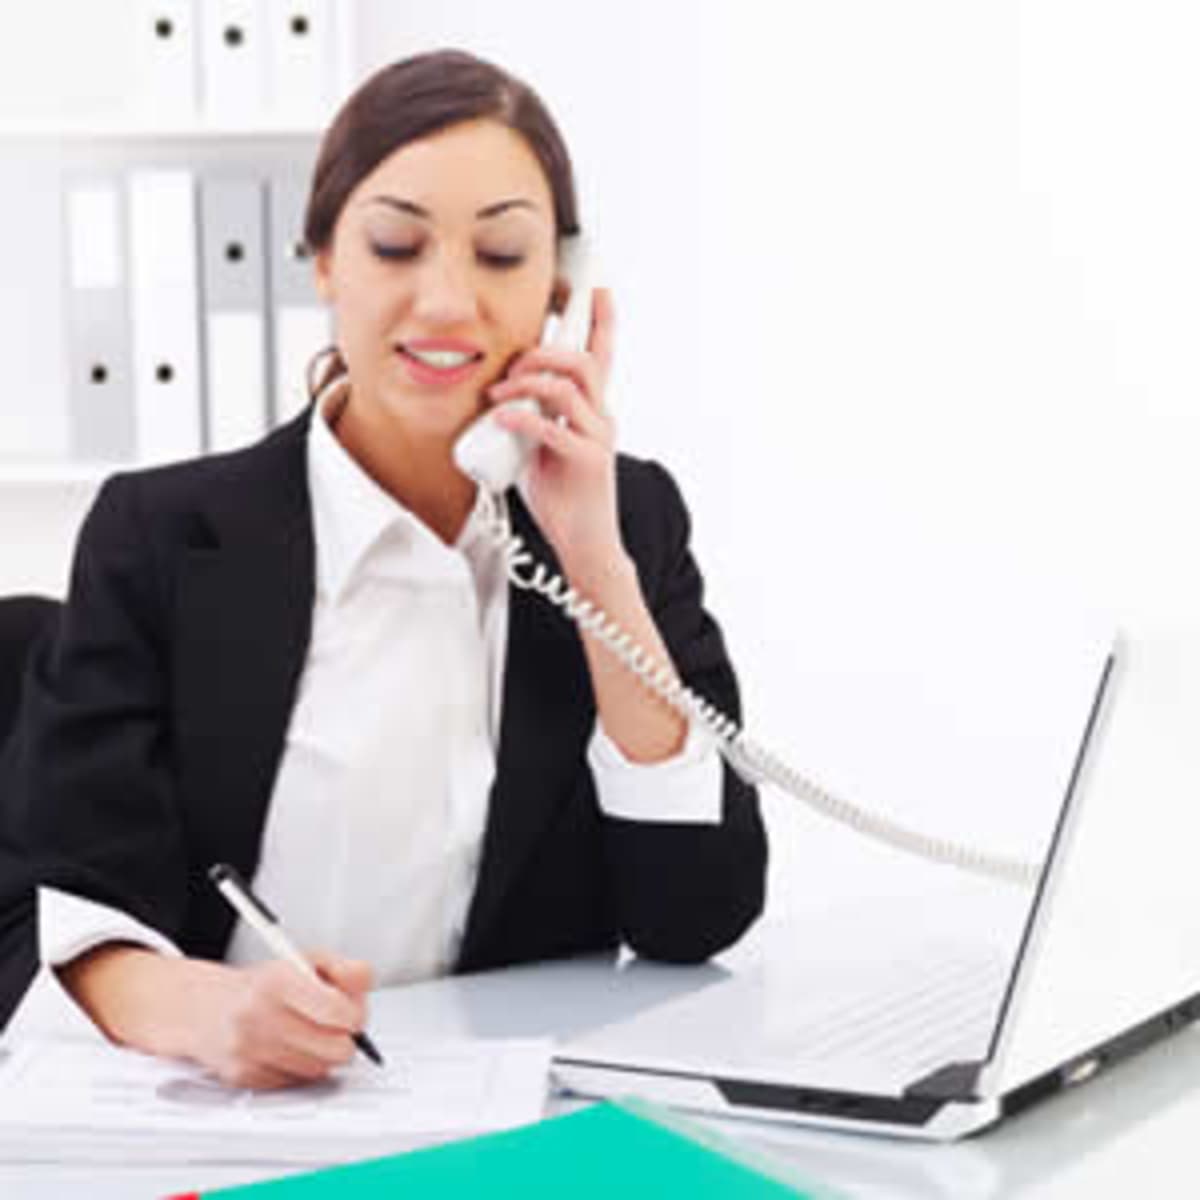 Need A Receptionist? Call The #1 Rated Receptionists